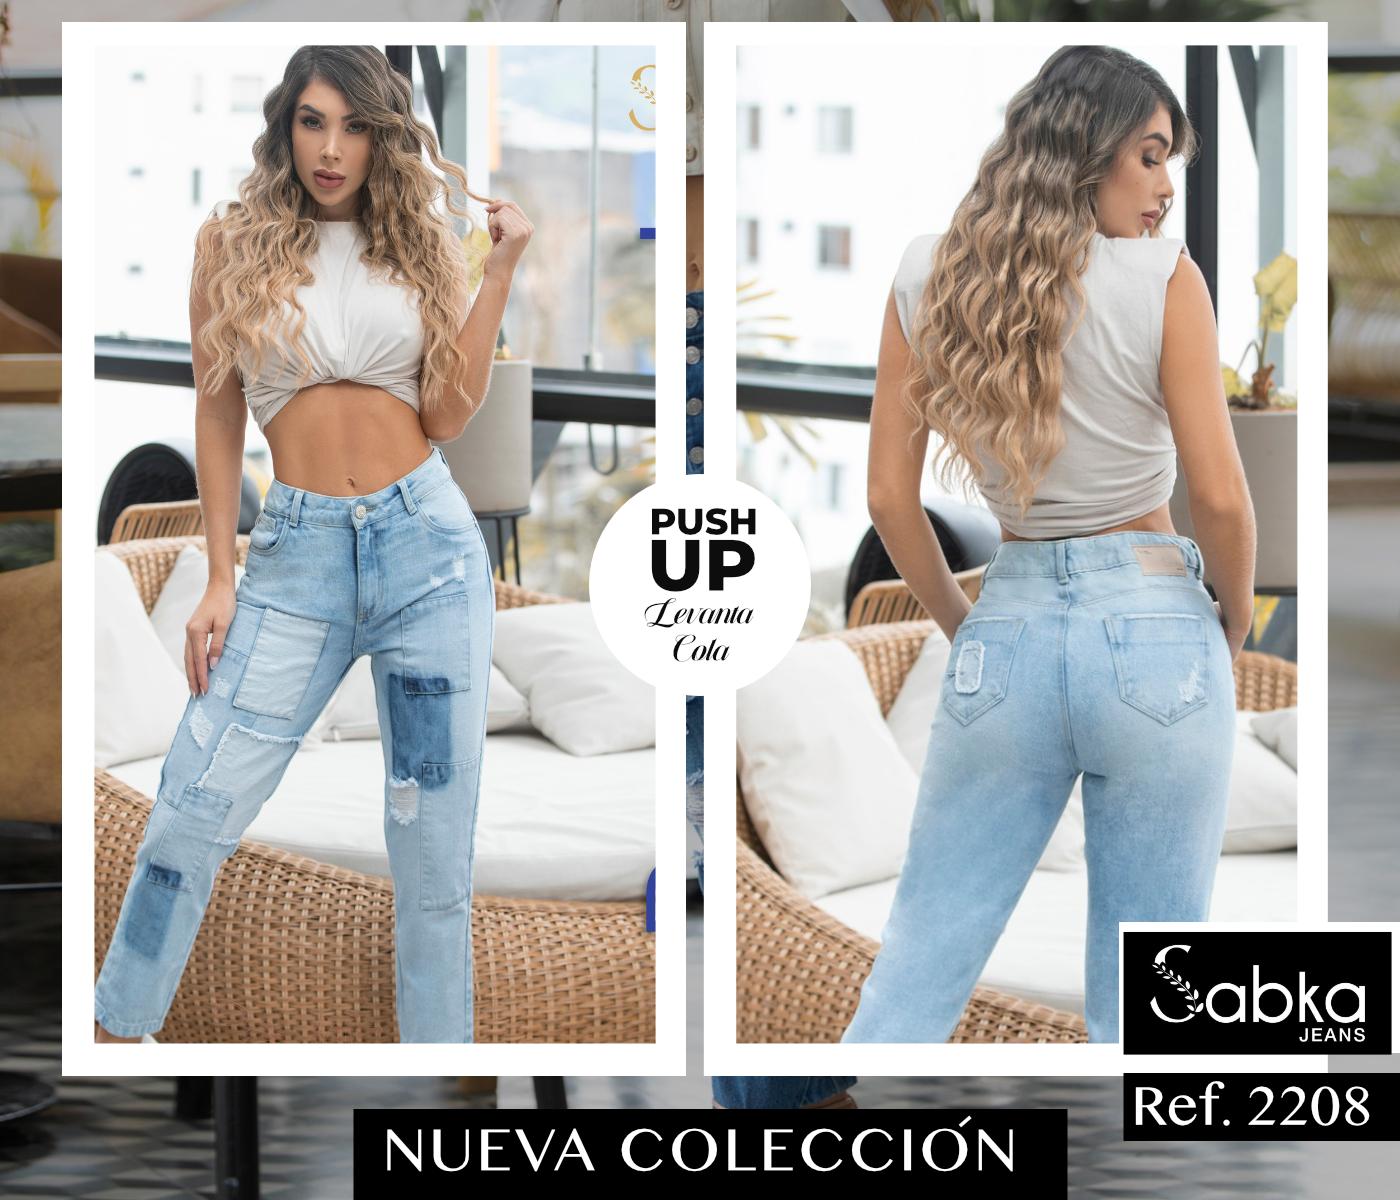 Comprar Jean push up colombiano